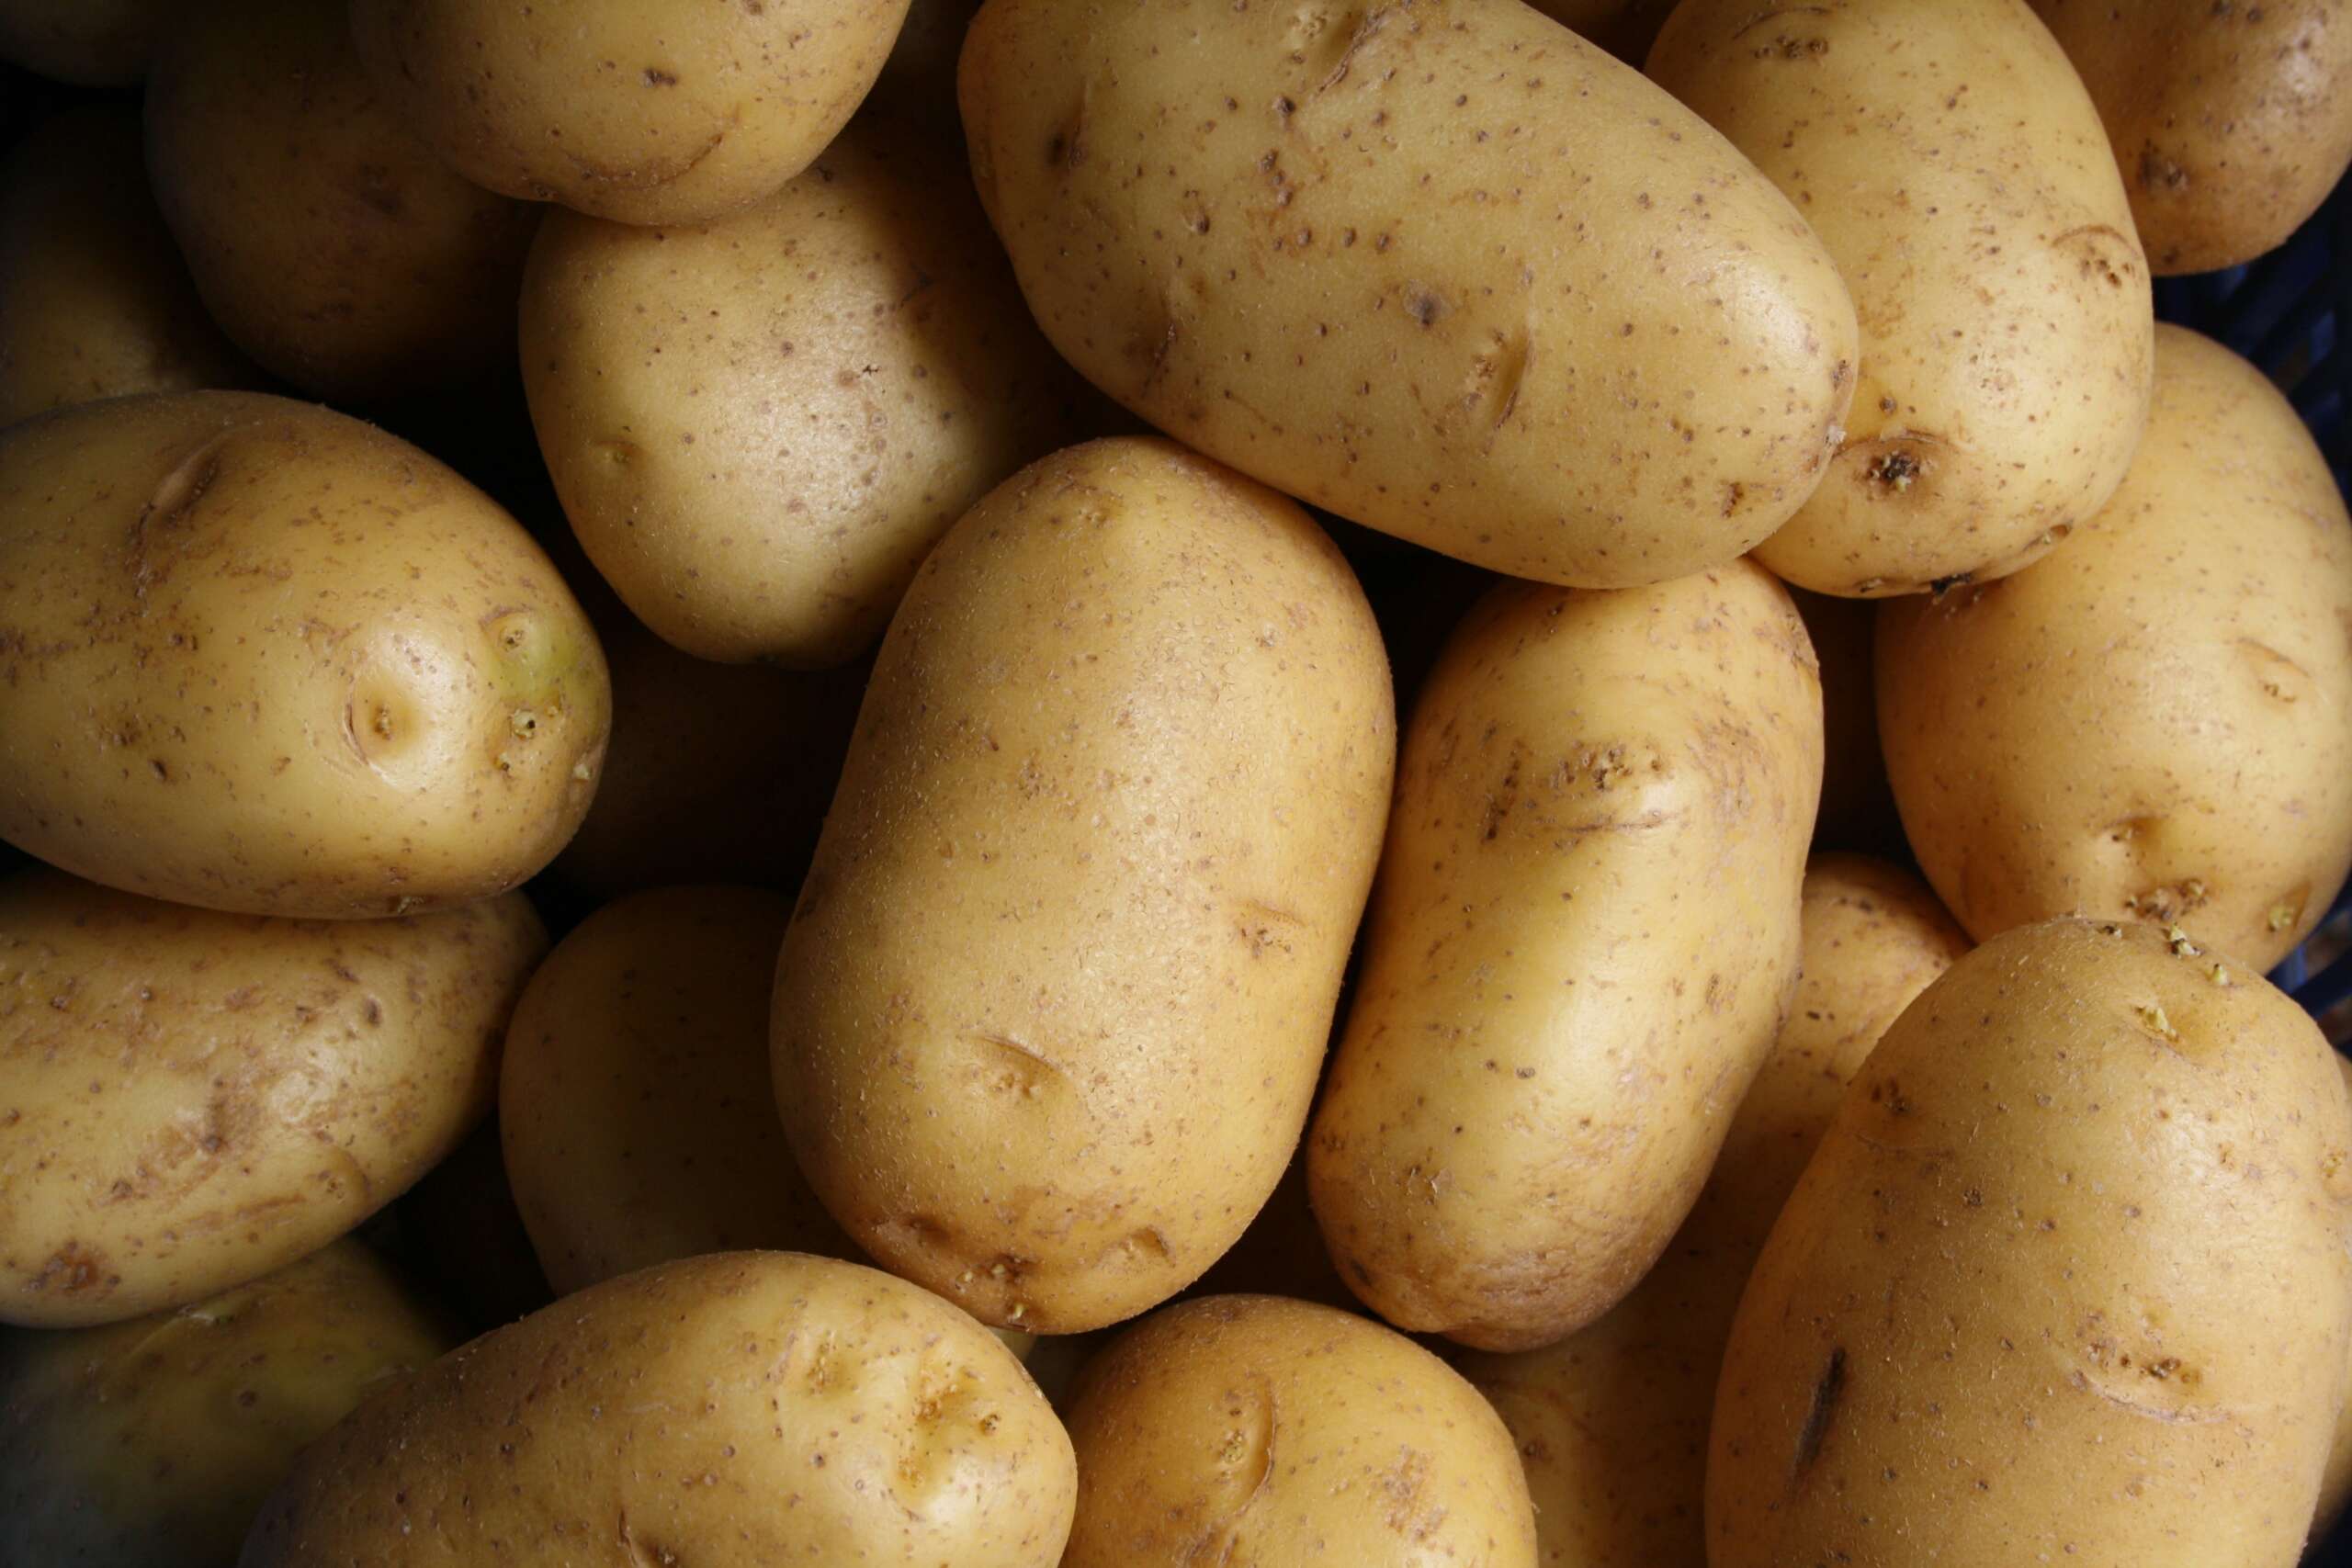 An image of a ton of golden potatoes.